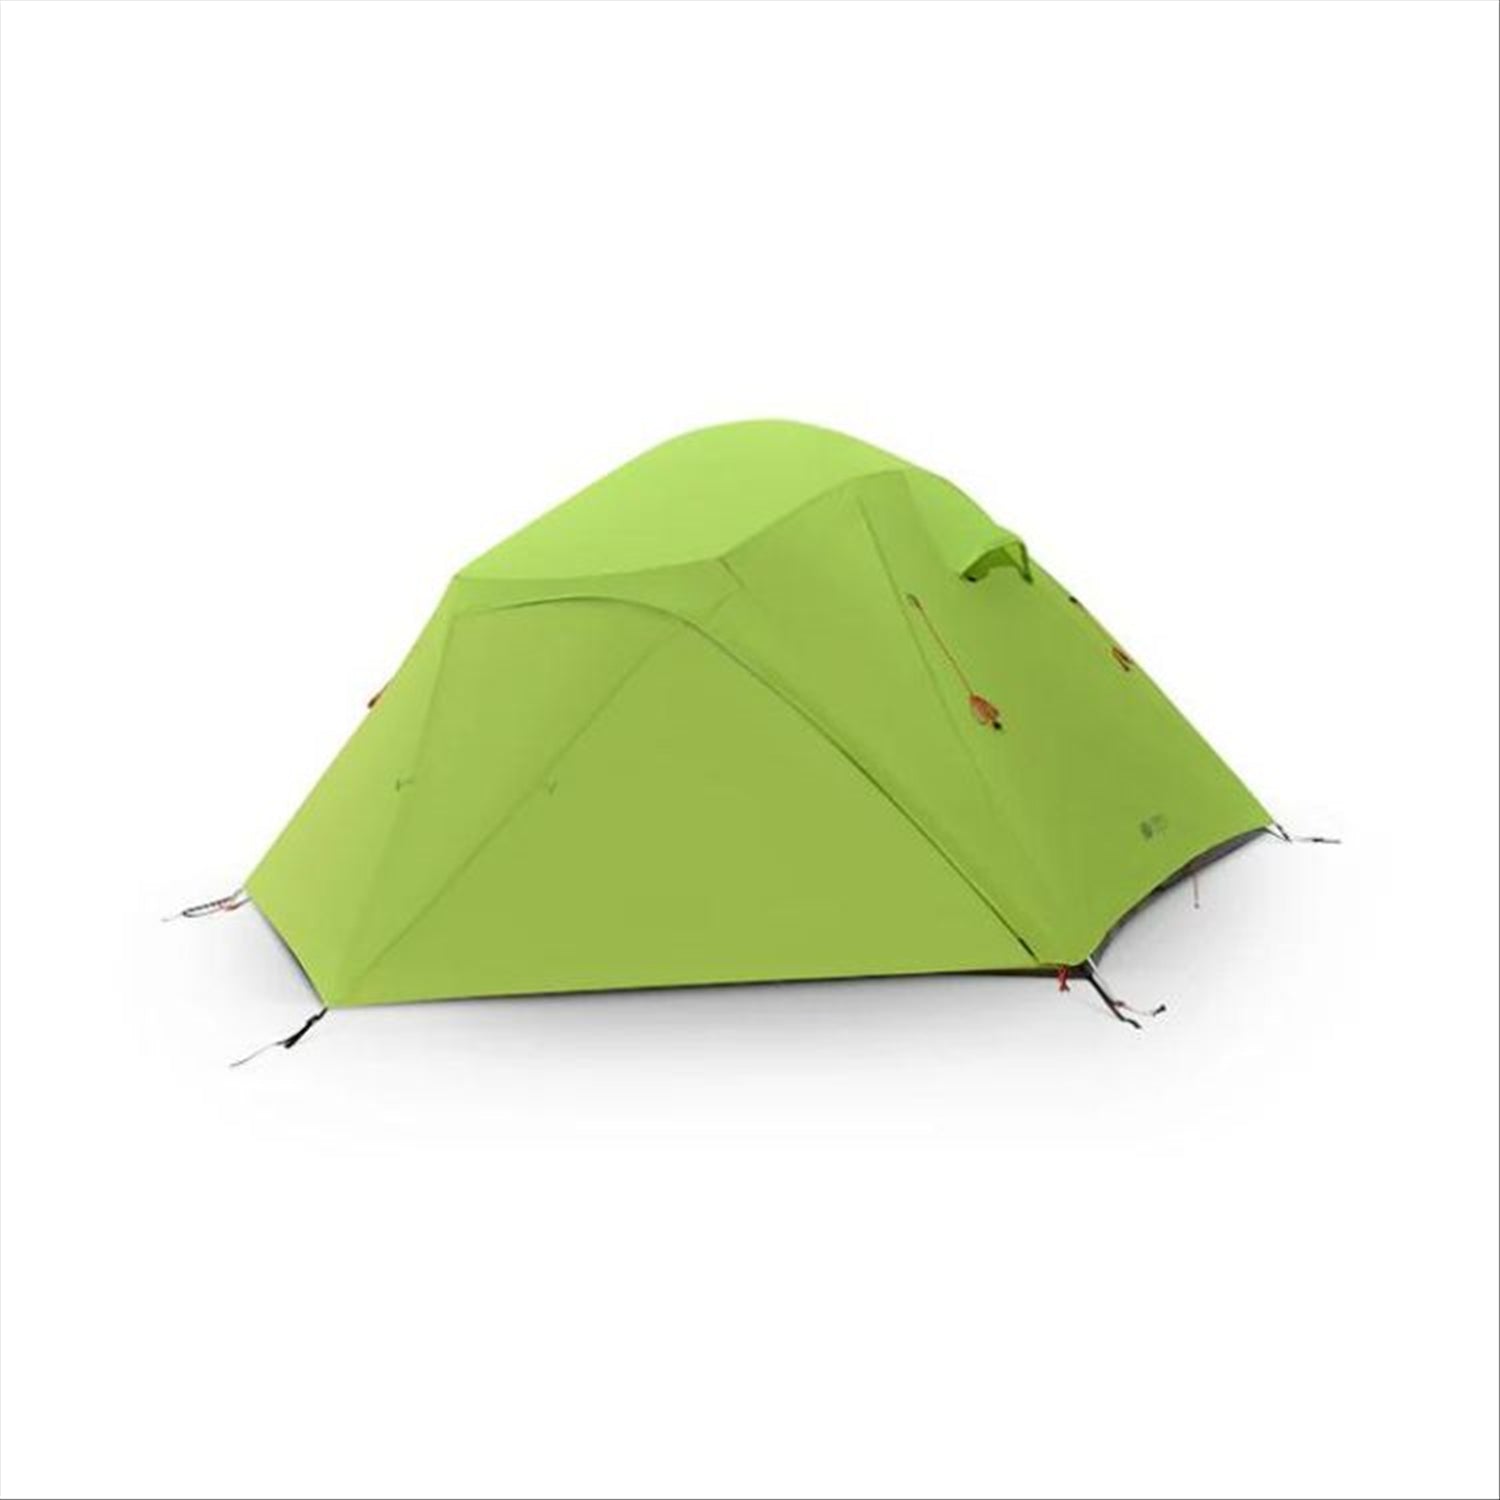 Intents Outdoors Titan 3 Person Camping Tent